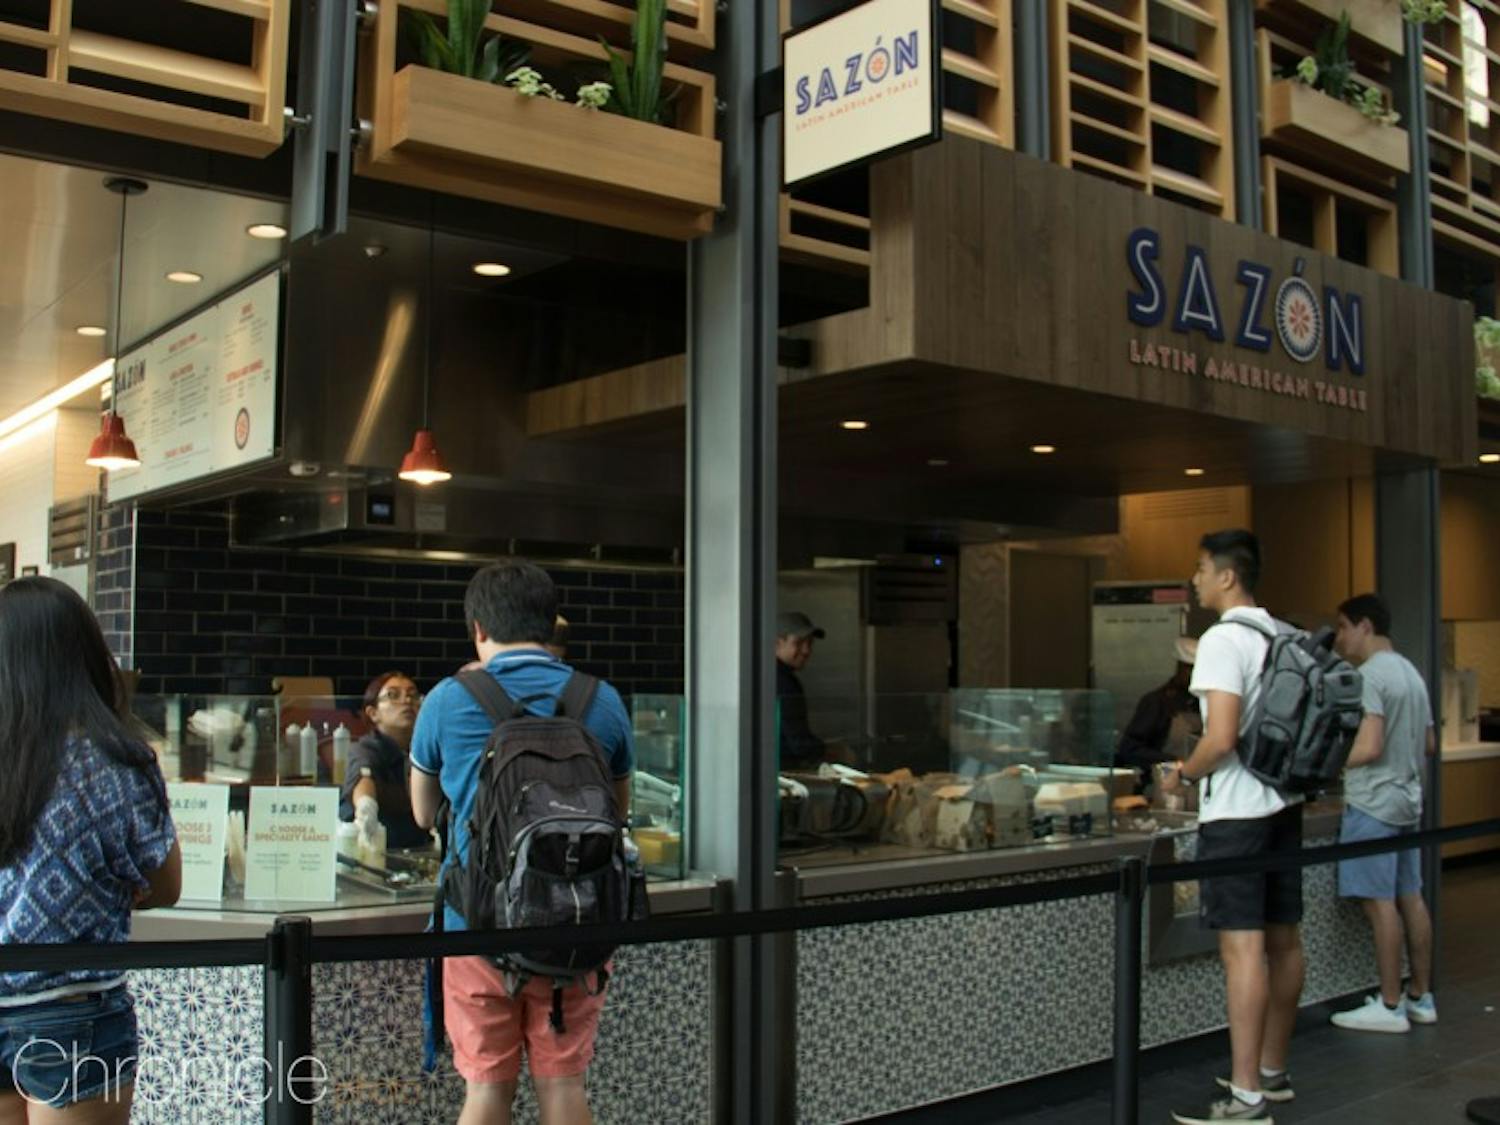 Latin American-inspired eatery Sazón opened to mixed reviews from students, with some citing price and long lines as downsides to the highly anticipated spot.